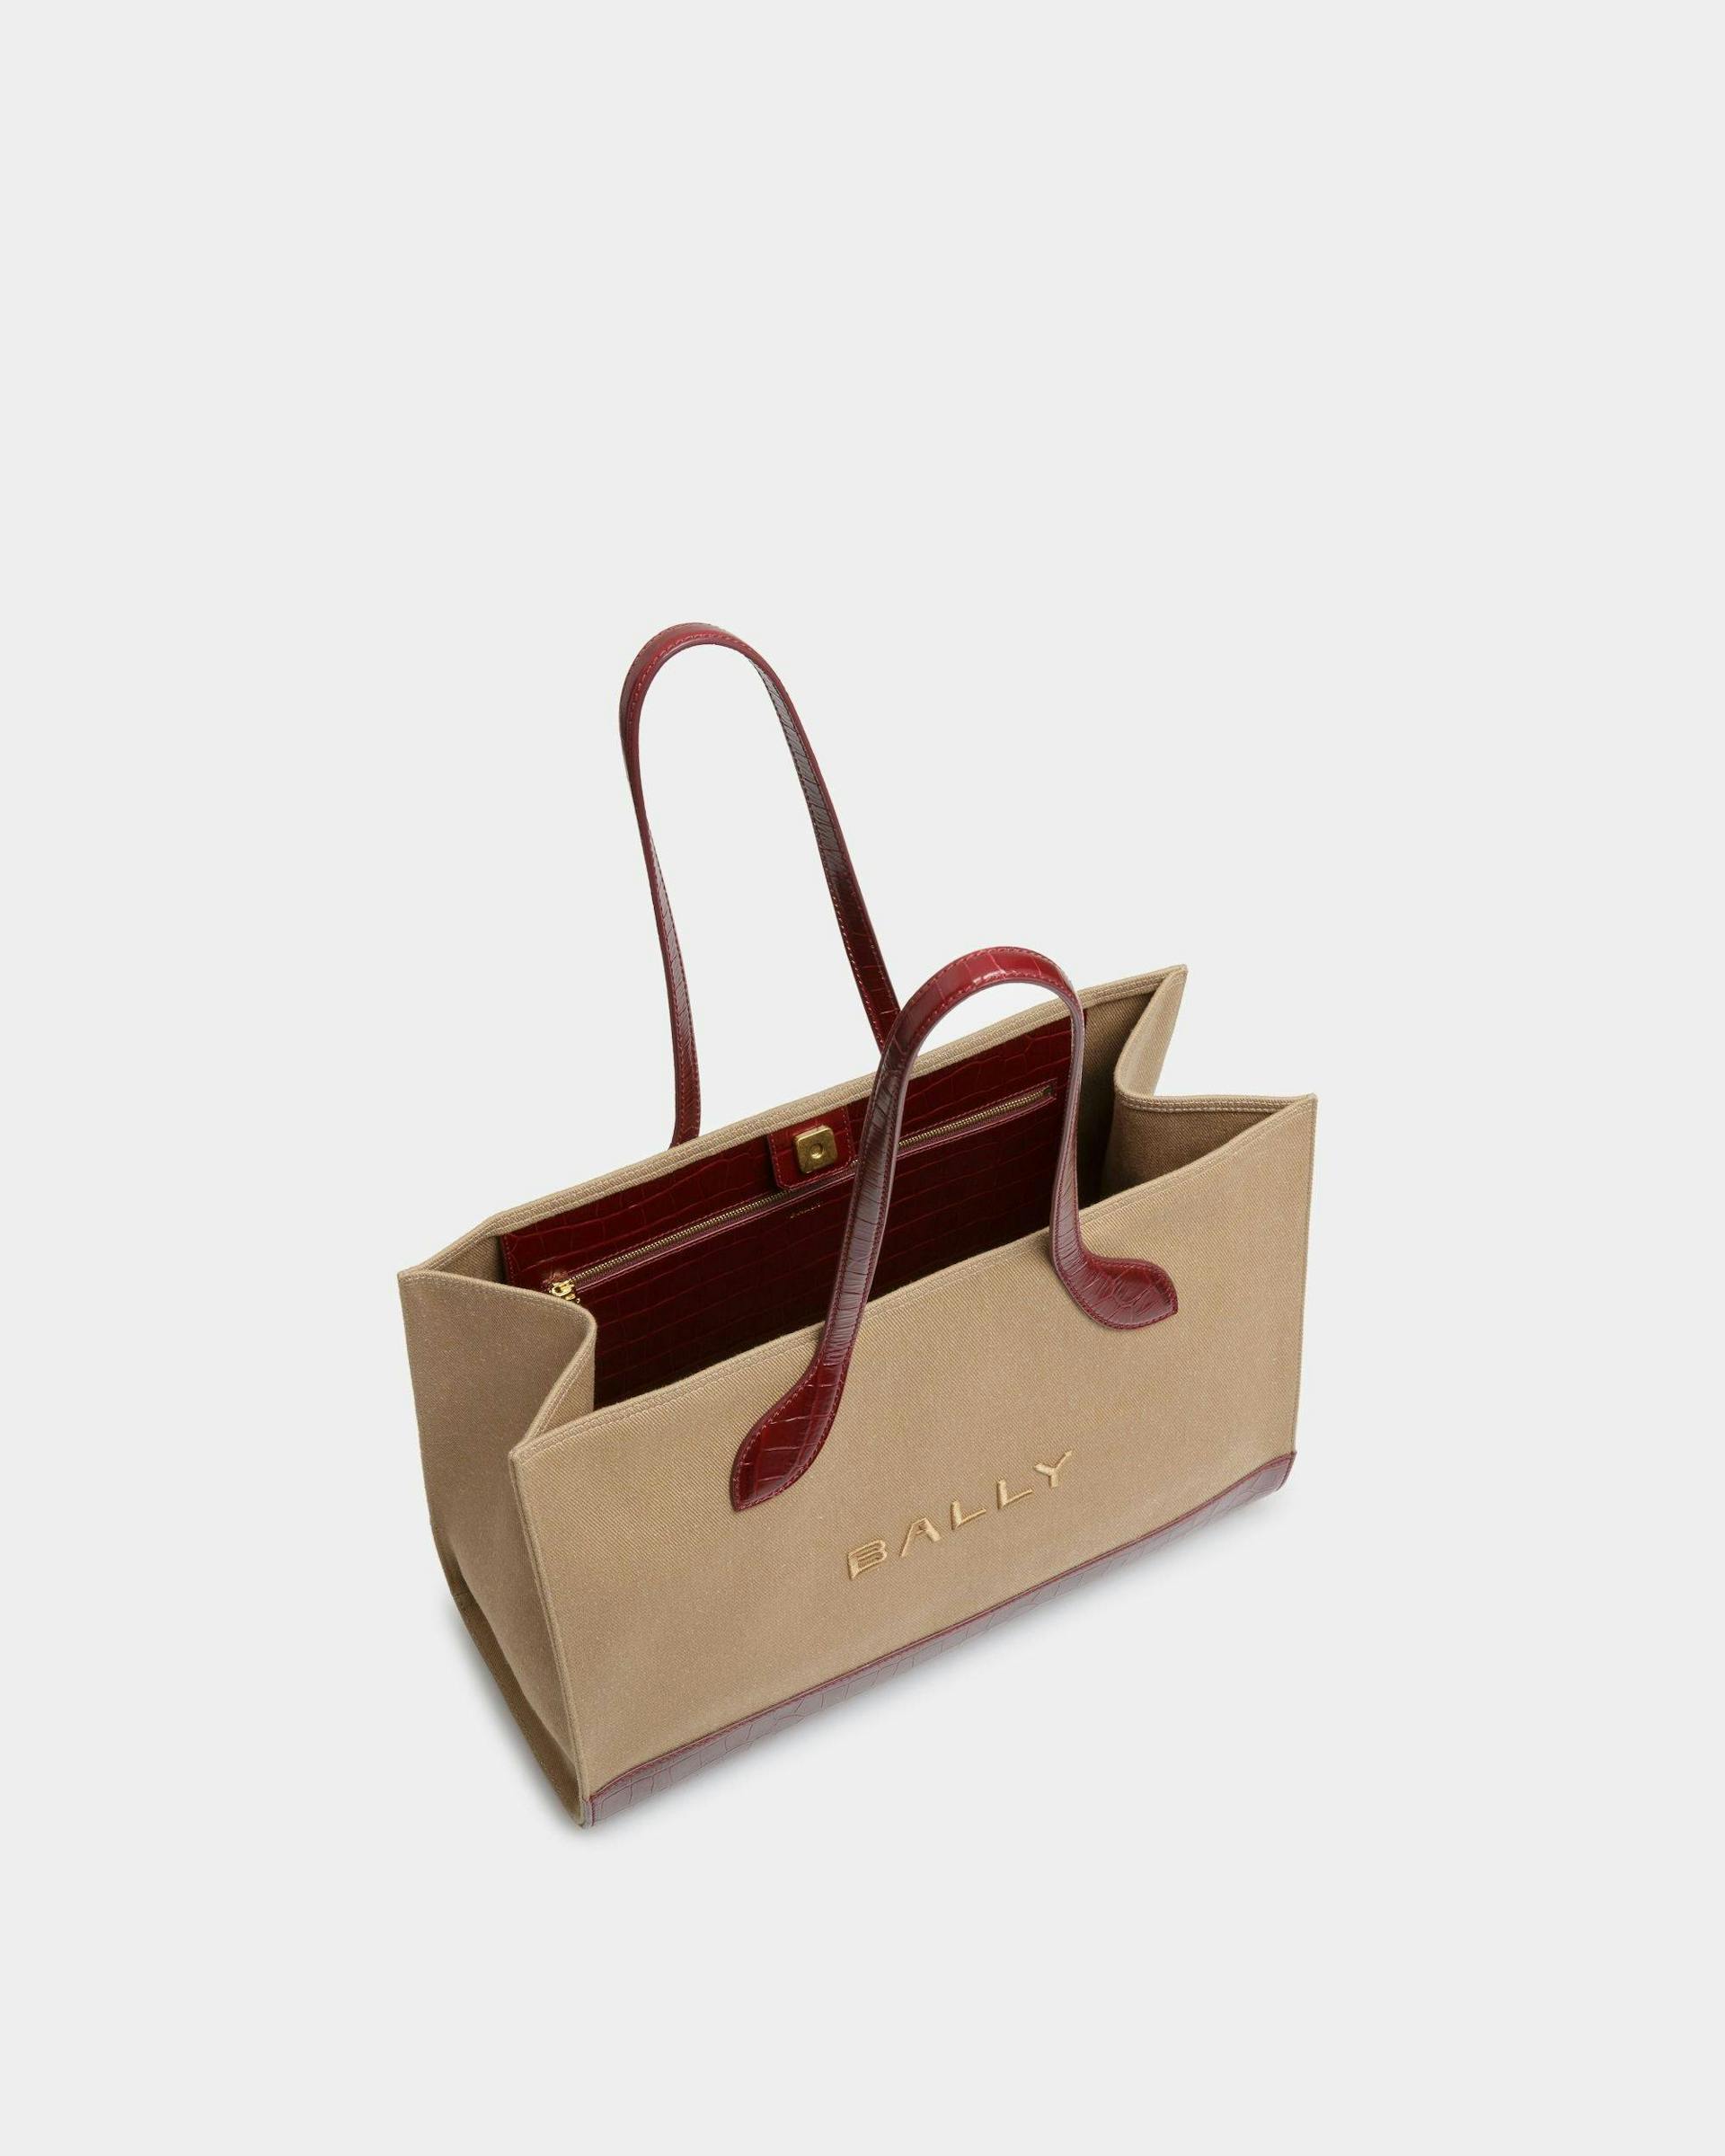 Bar Tote Bag In Sand And Burgundy Fabric - Women's - Bally - 05